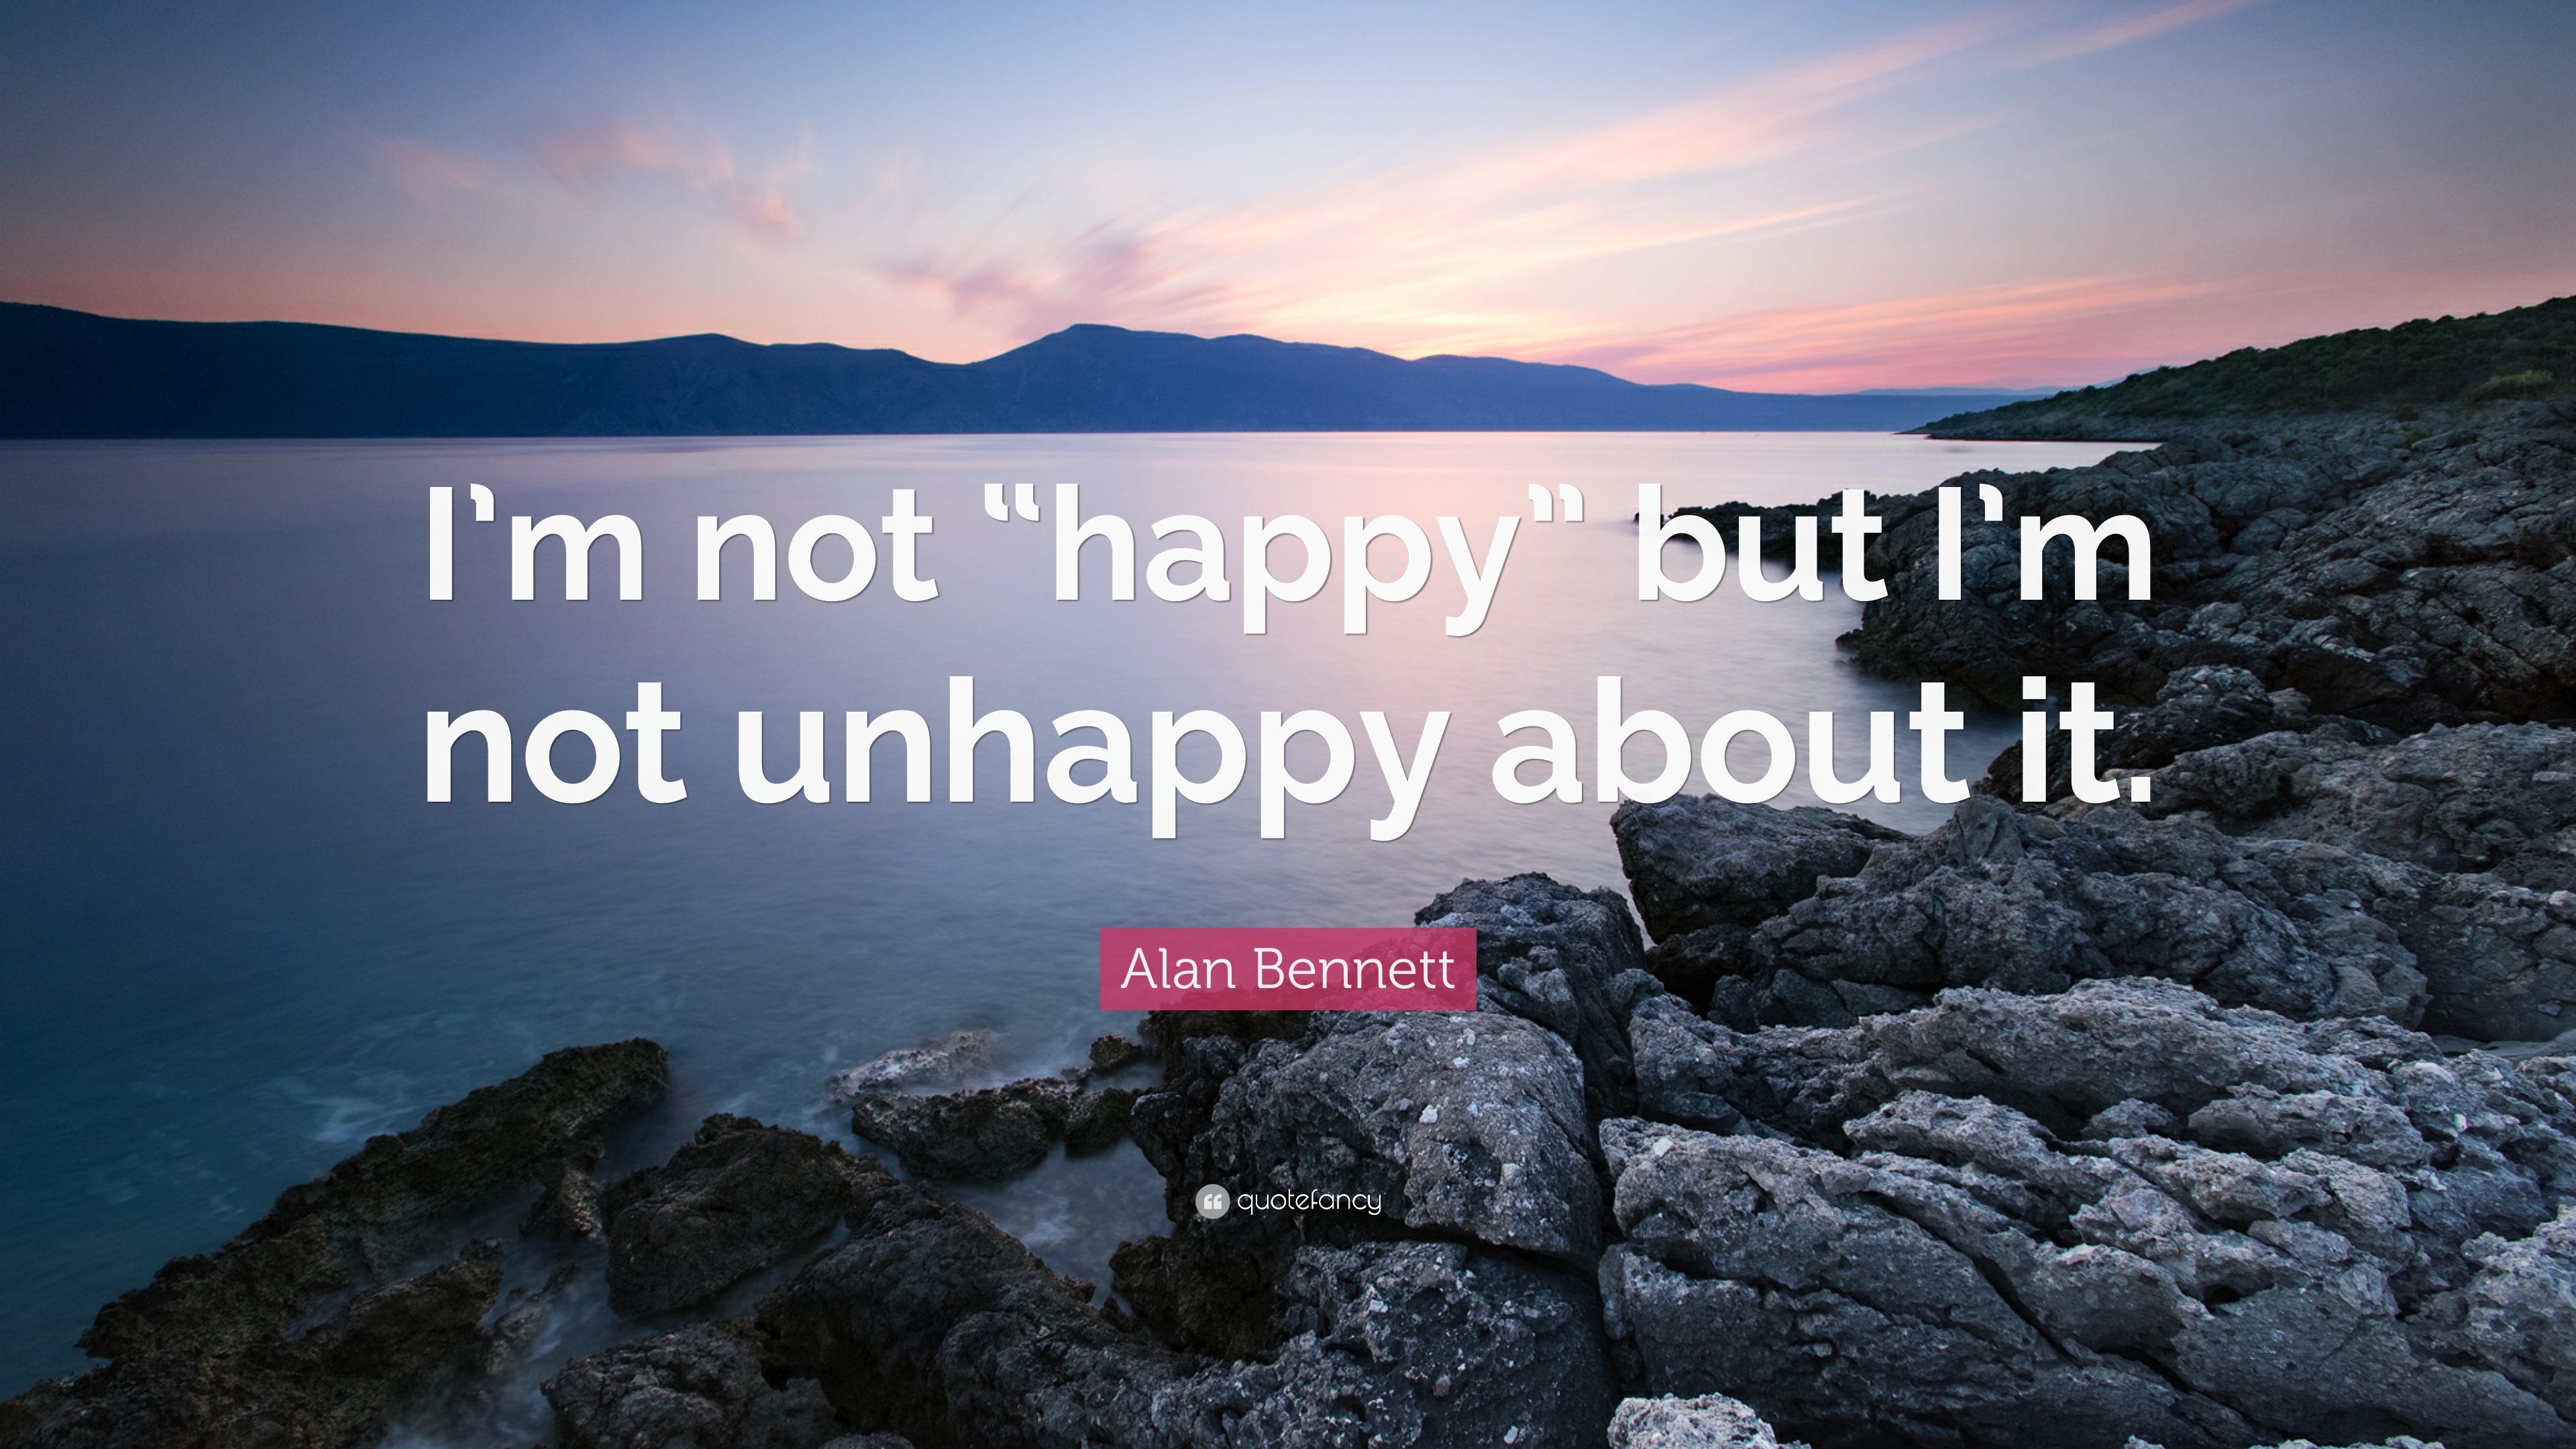 Alan Bennett Quote: “I'm not “happy” but I'm not unhappy about it.”